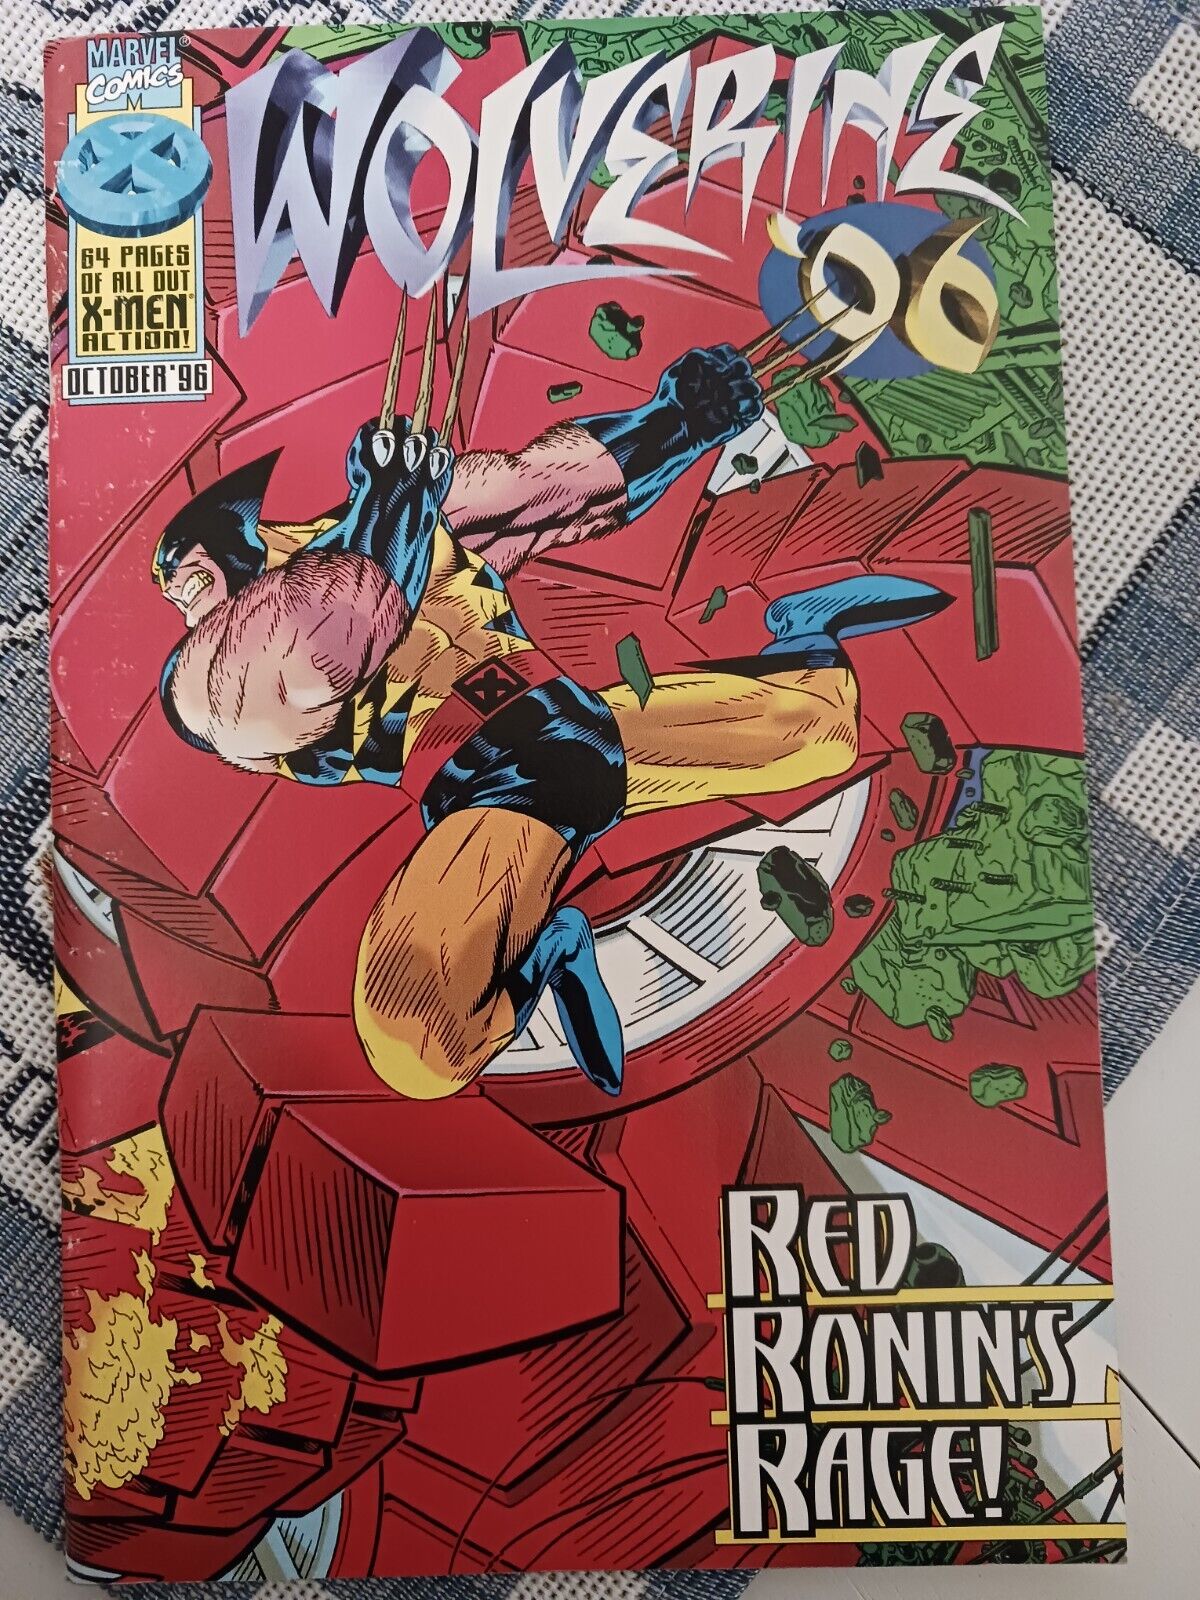 Wolverine \'96 Marvel Comics 1996 Very Fine condition w/ white inner pages